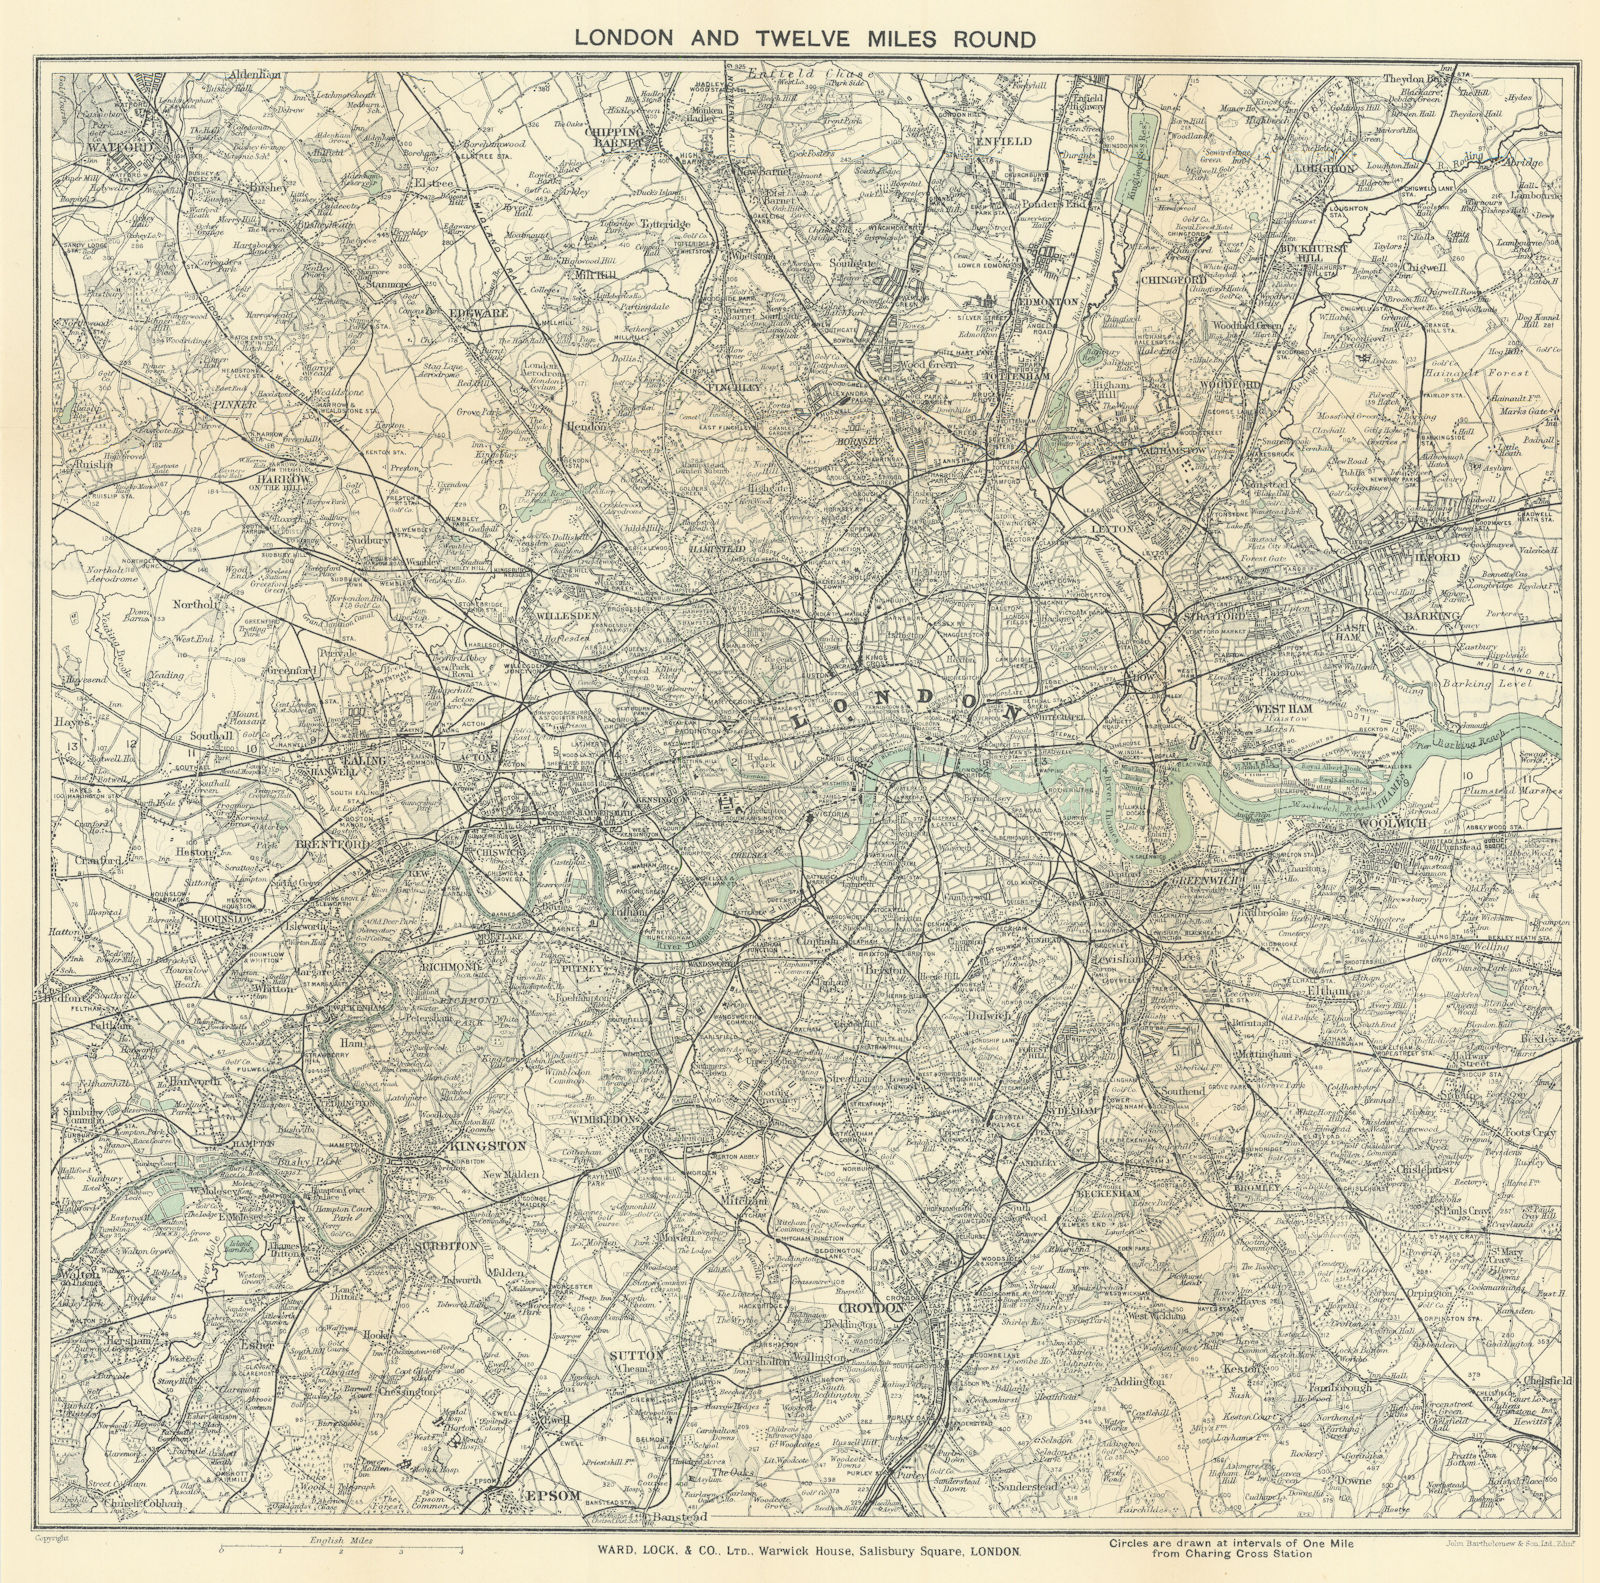 Associate Product 'LONDON AND TWELVE MILES ROUND'. Greater London. WARD LOCK 1921 old map